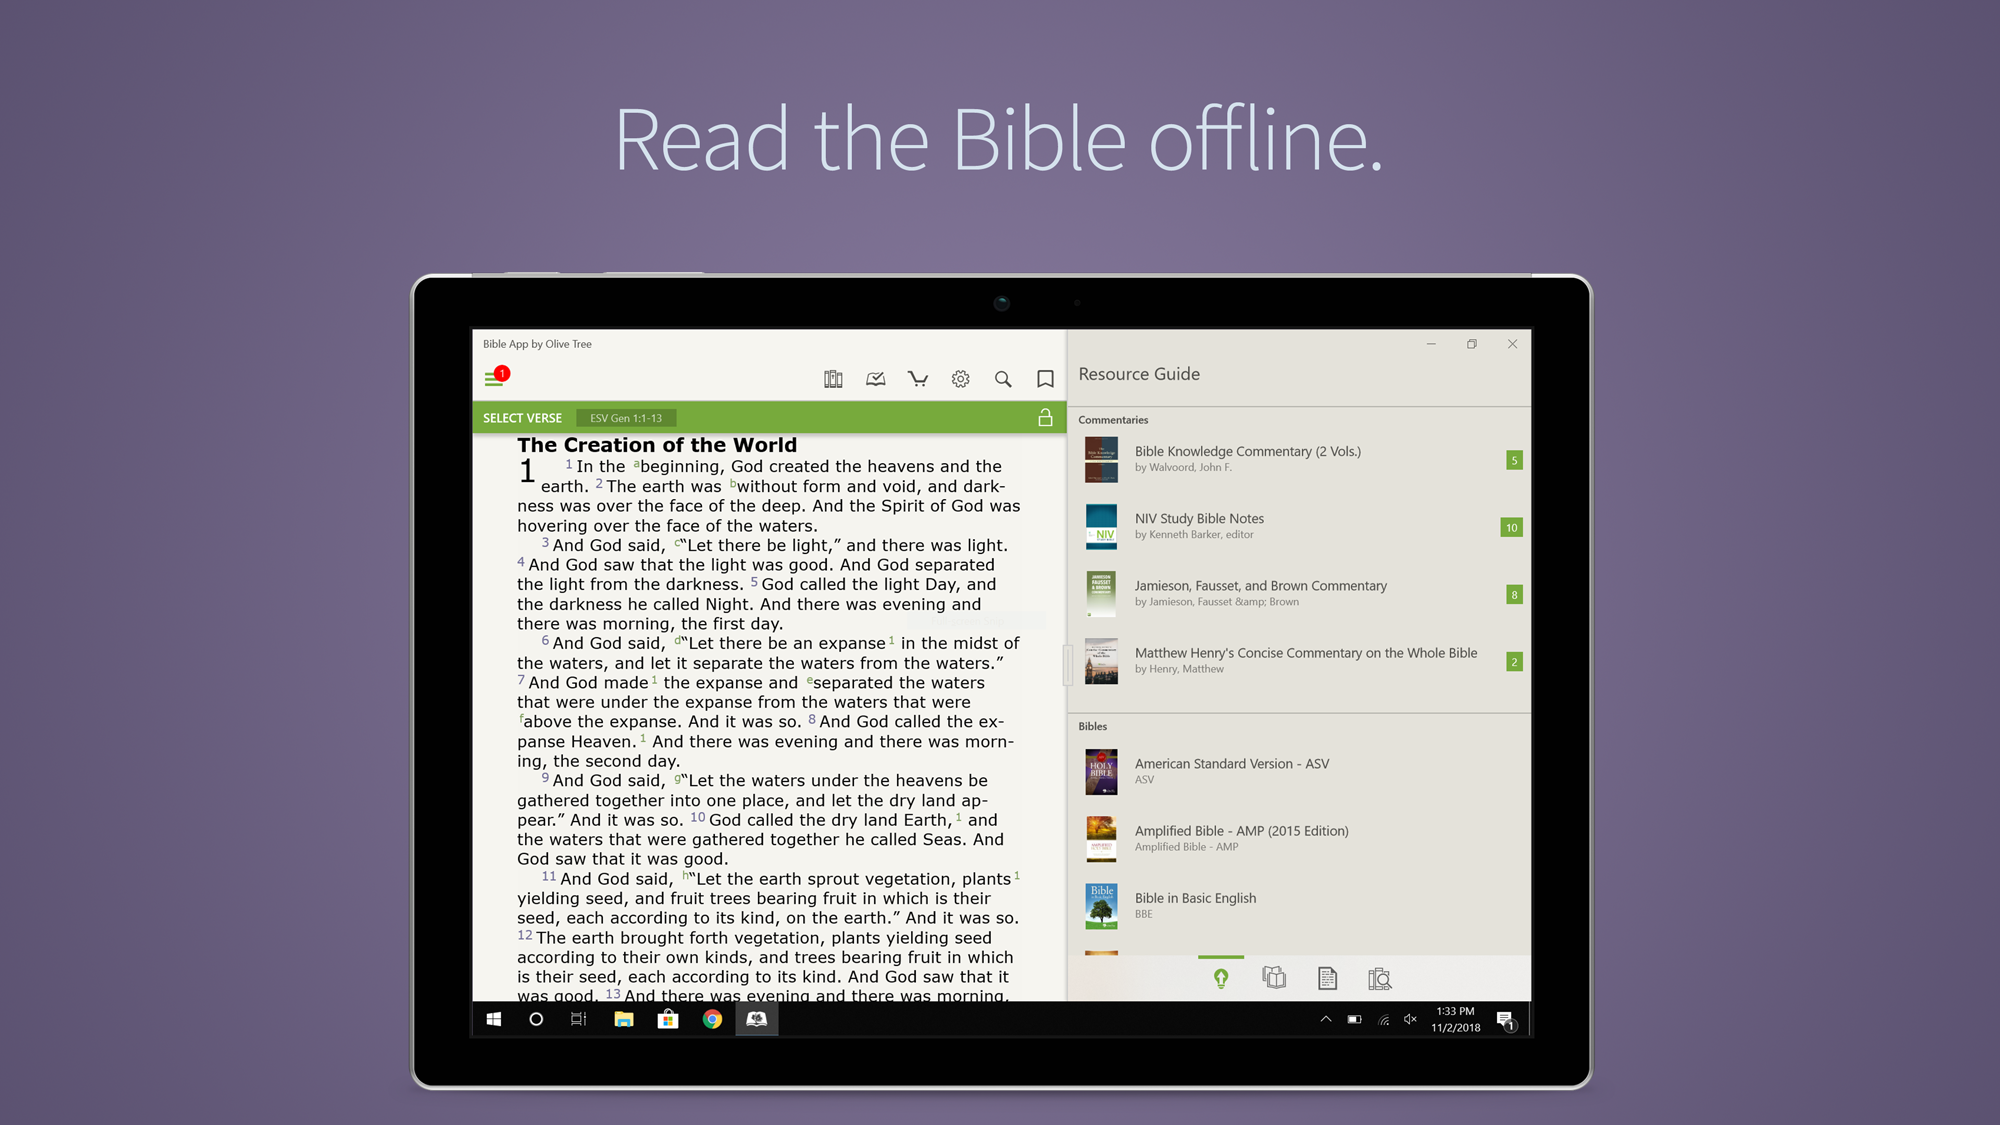 Bible Verse Software: Explore feature-rich bible software options such as Logos Bible Software or Olive Tree Bible Software.
Bible Apps: Consider using Bible apps like YouVersion or Blue Letter Bible that offer a variety of features including verse pop-ups.